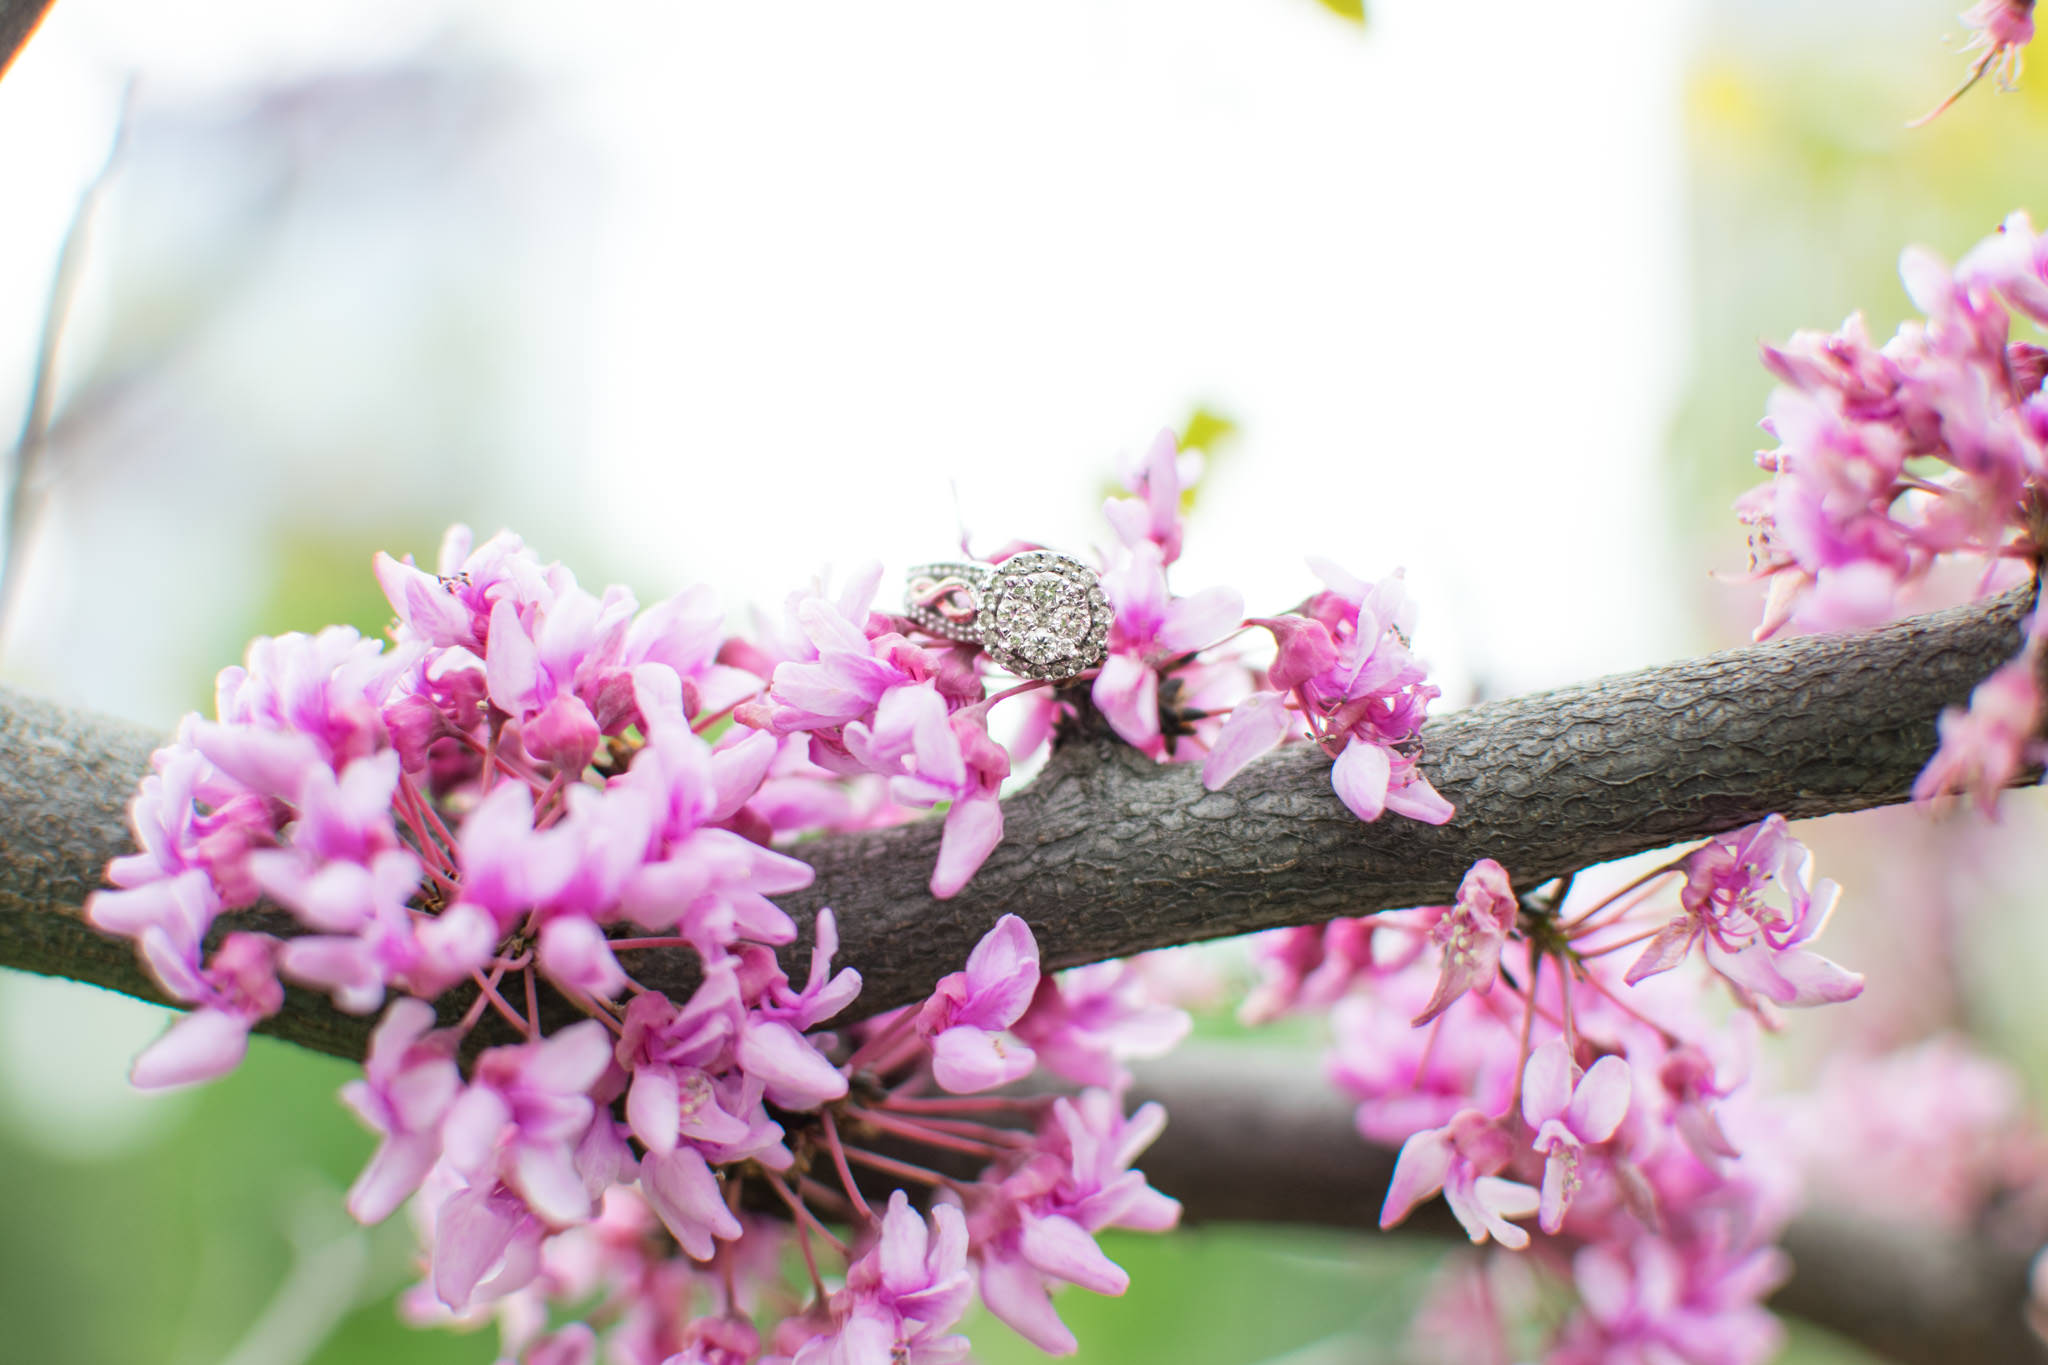 engagement ring sits in the pink flowers of a tree